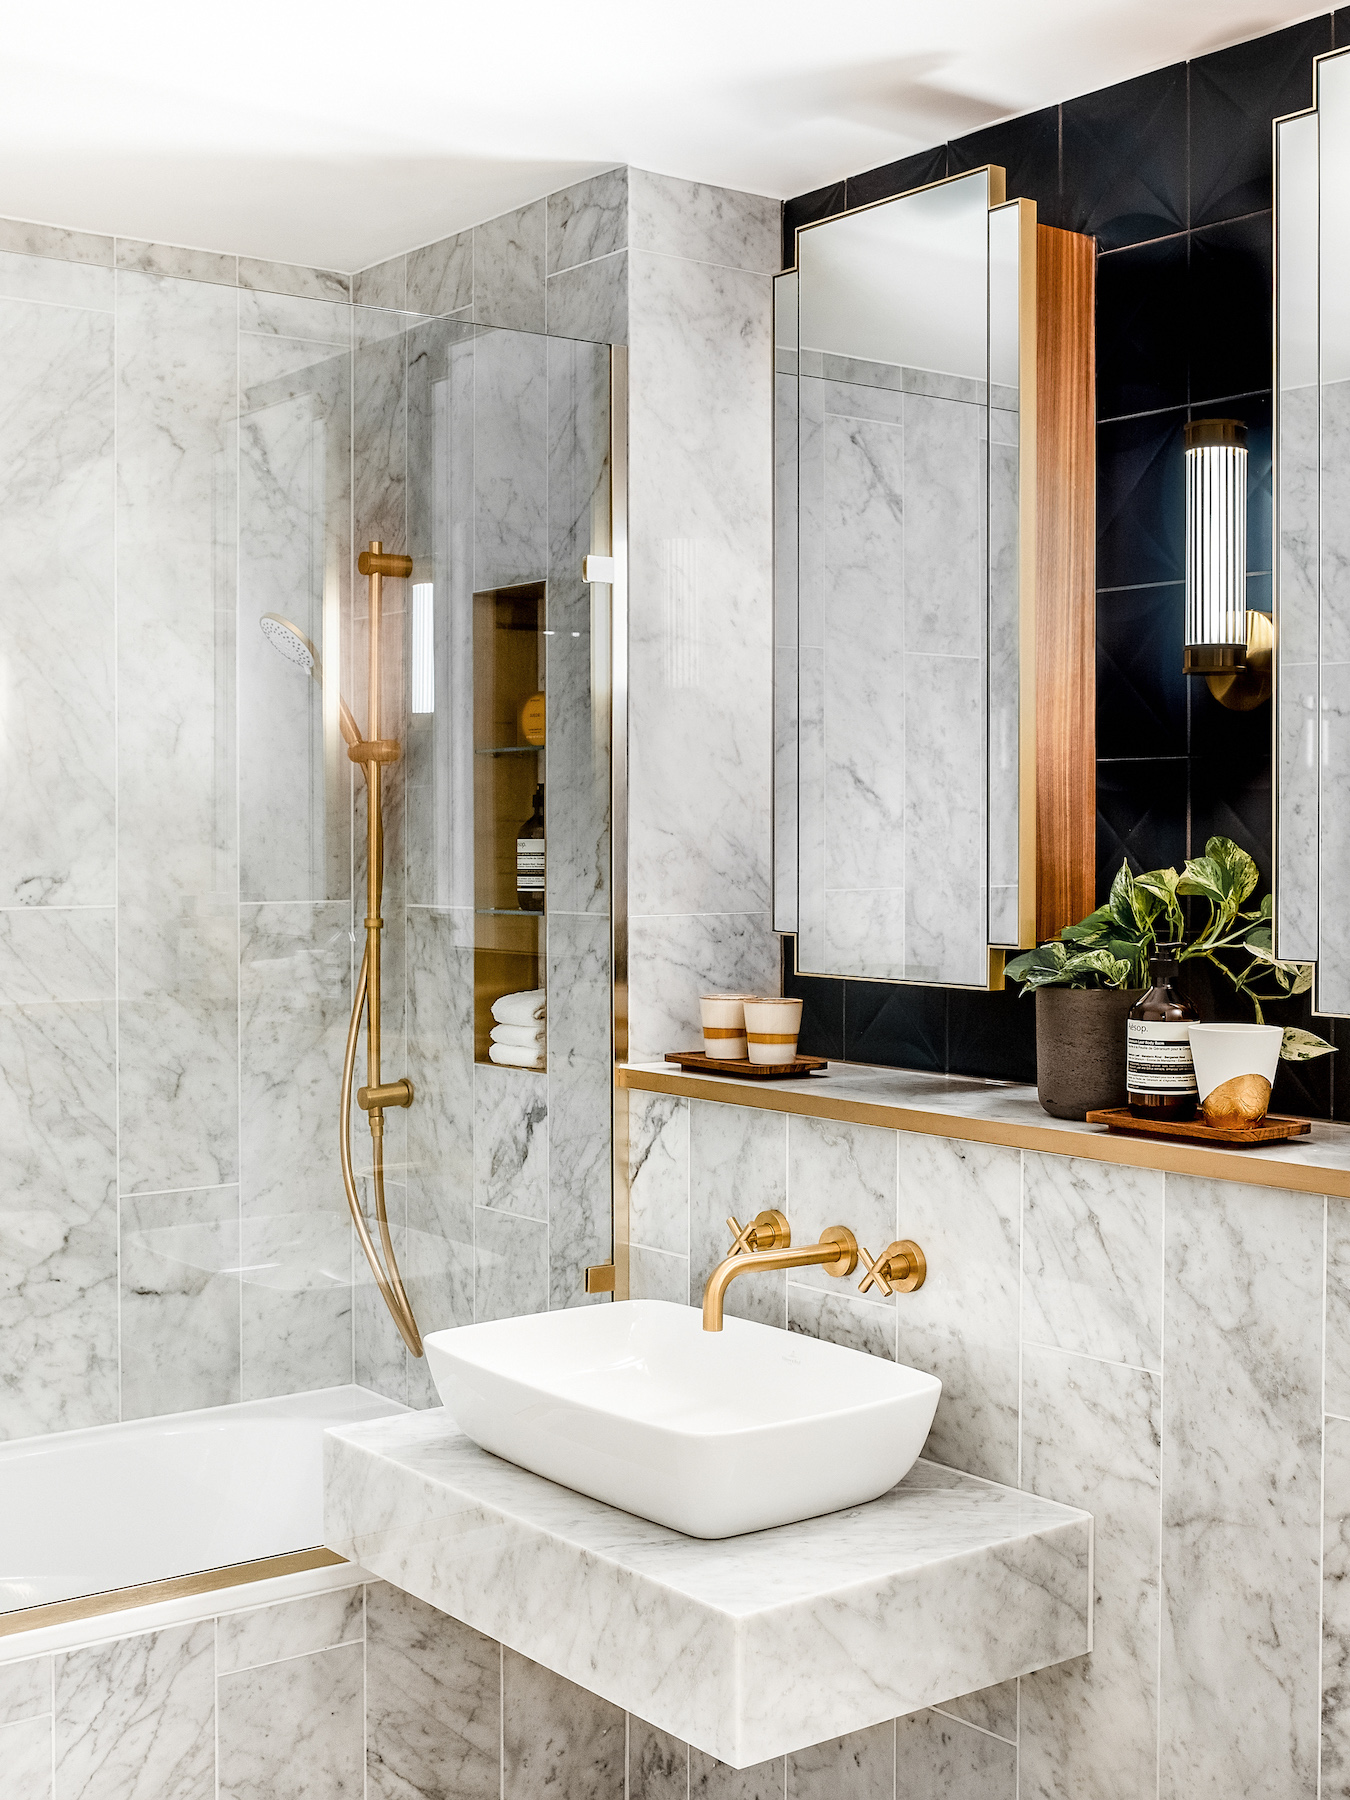 Spathroom at Chelsea Creek project by interior designers Goddard Littlefair in Effect Magazine